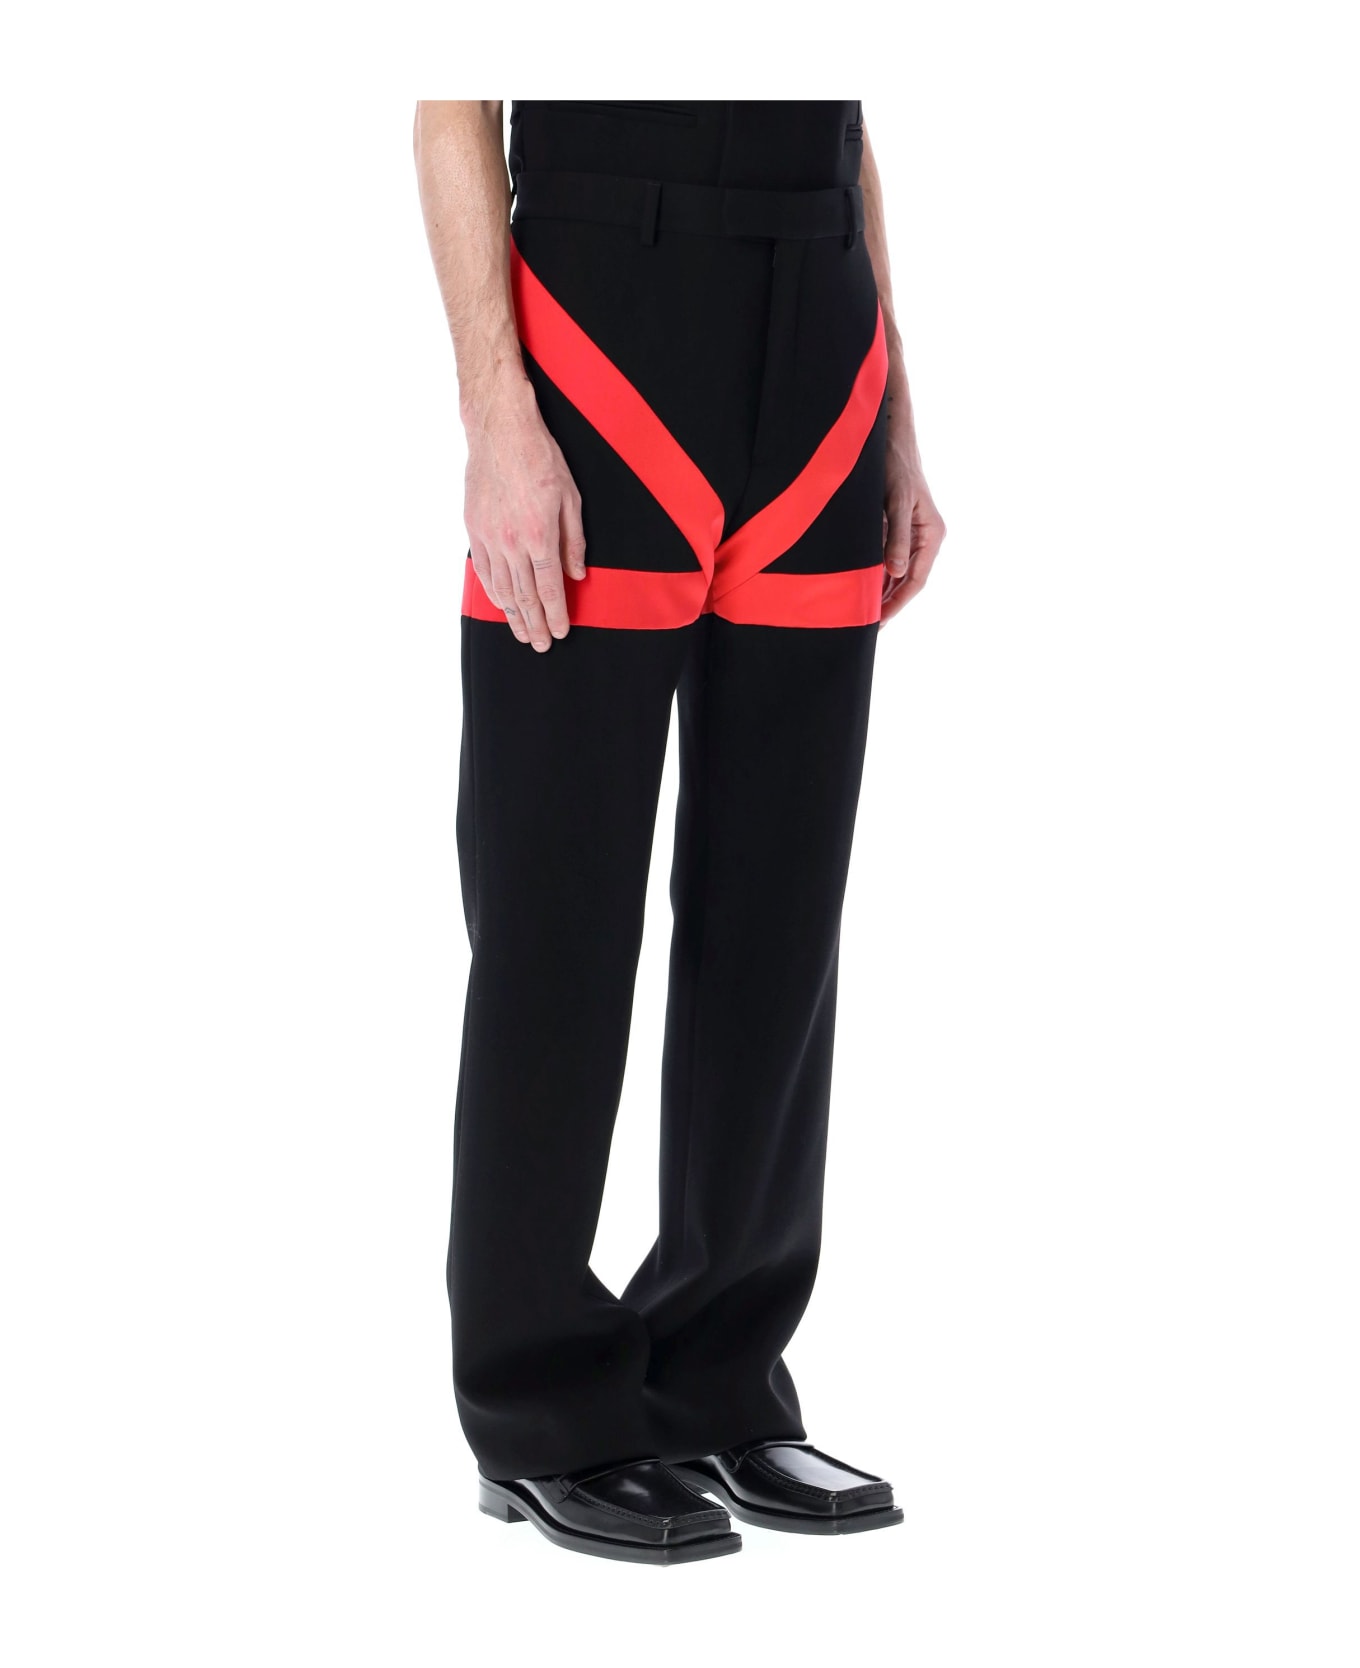 Ferragamo Tailored Pants With Inlays - BLACK RED ボトムス